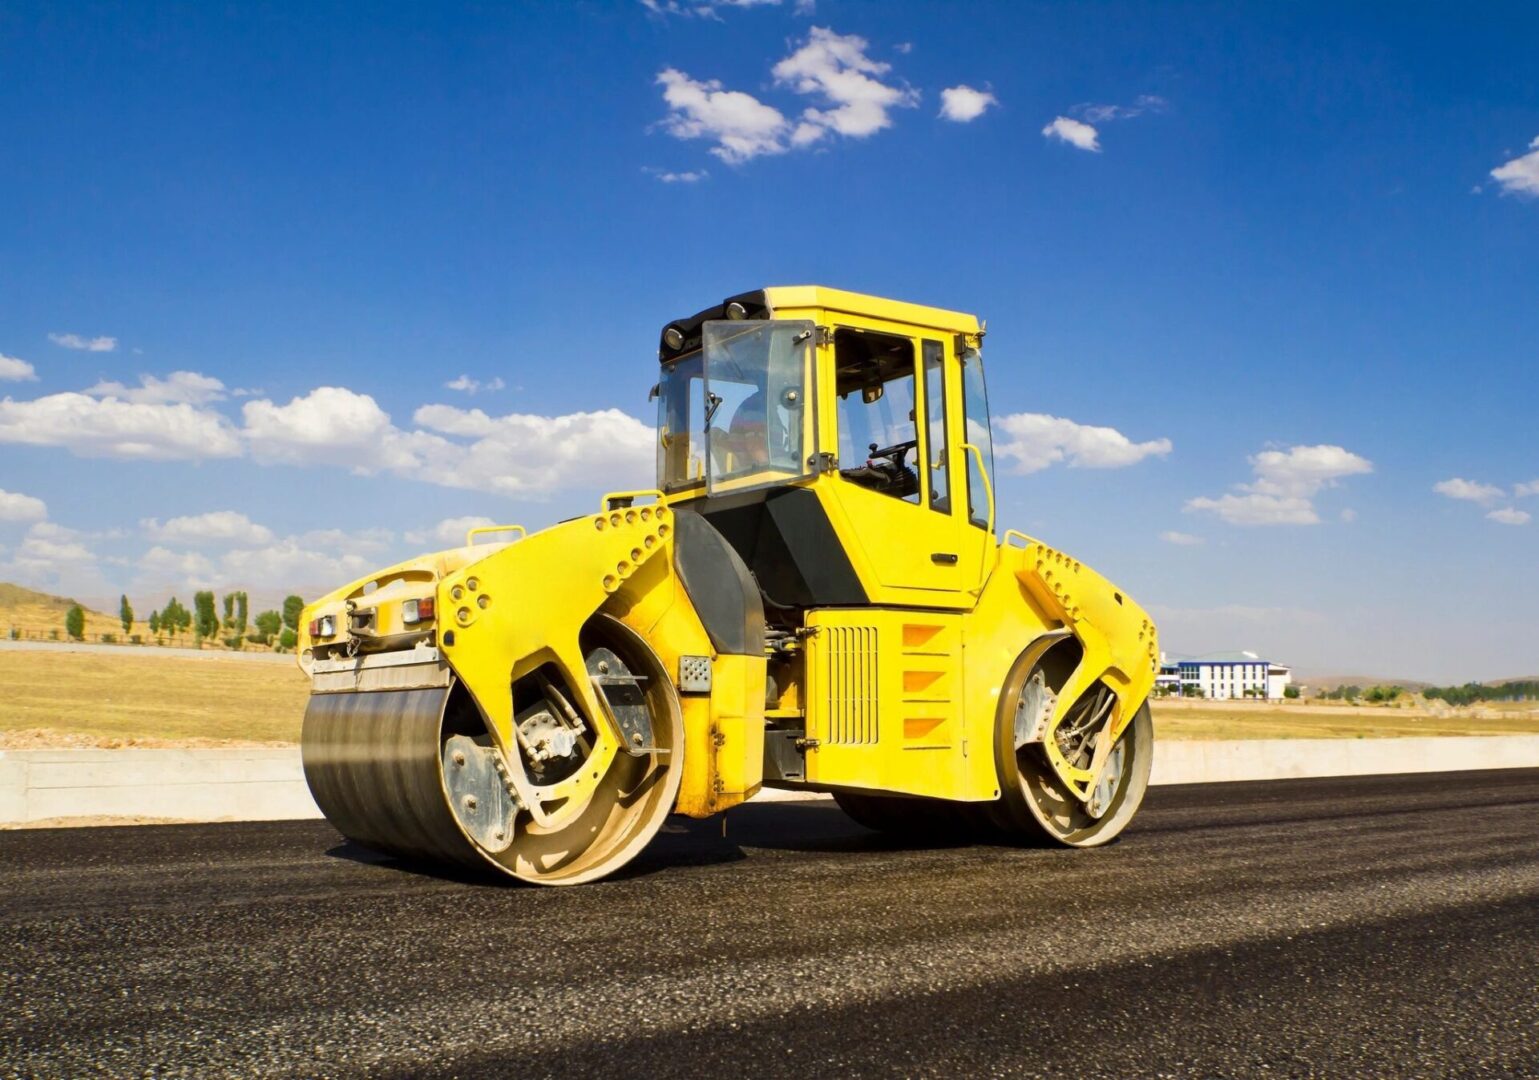 A yellow road roller is on the side of a street.